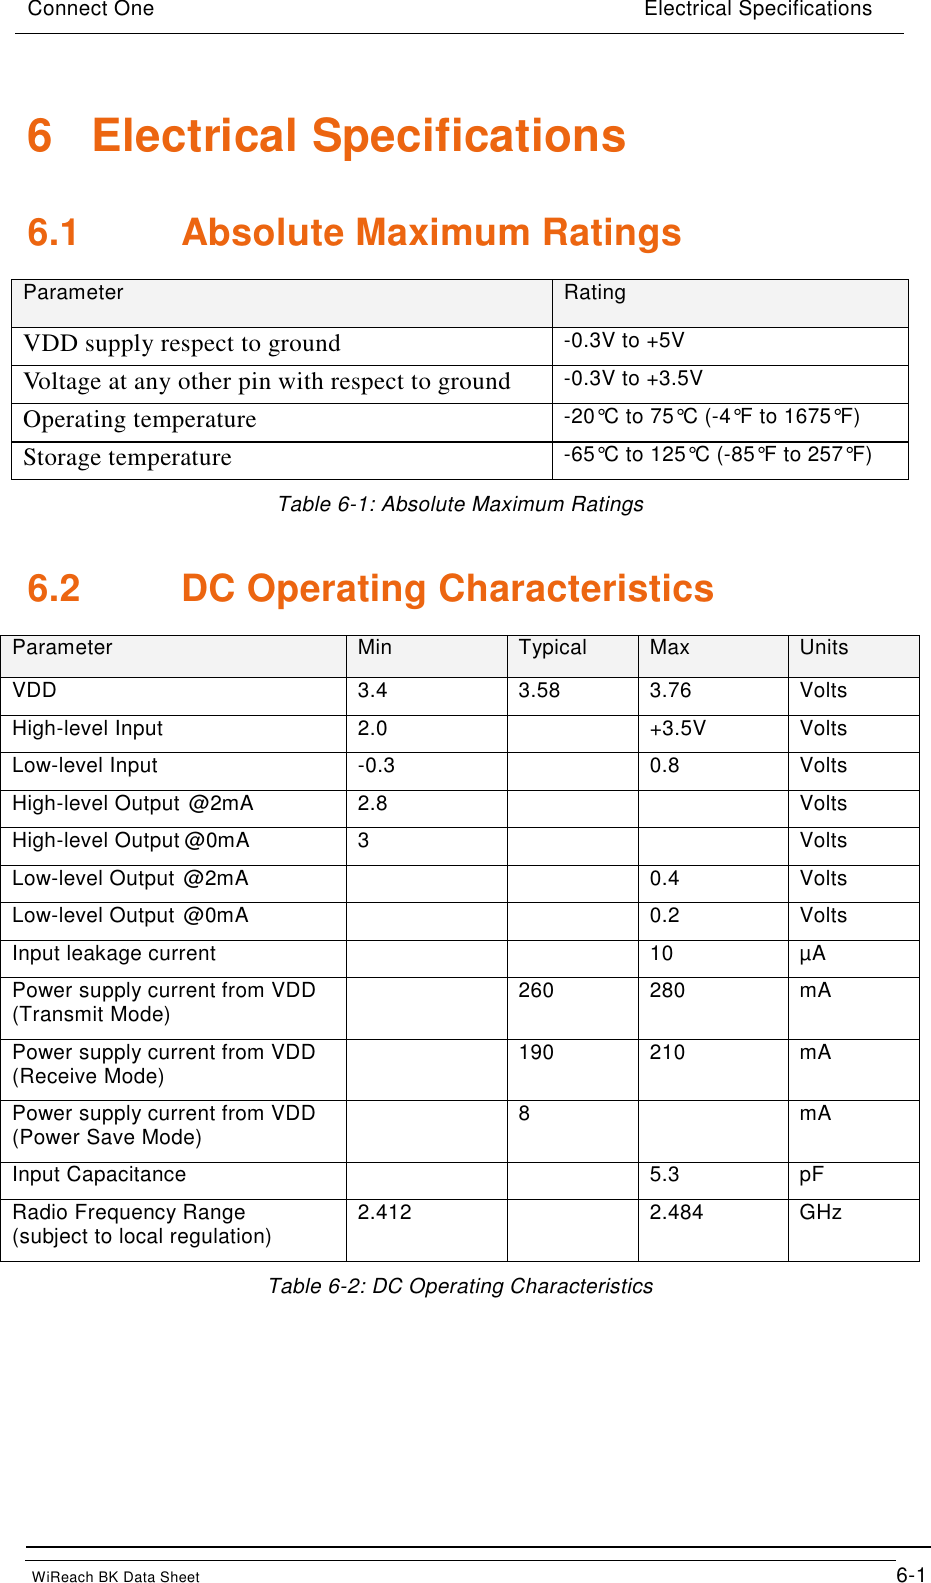 Connect One                             Electrical Specifications                                                    WiReach BK Data Sheet                                         6-1 6  Electrical Specifications 6.1  Absolute Maximum Ratings Parameter Rating VDD supply respect to ground -0.3V to +5V Voltage at any other pin with respect to ground -0.3V to +3.5V Operating temperature -20°C to 75°C (-4°F to 1675°F) Storage temperature -65°C to 125°C (-85°F to 257°F) Table 6-1: Absolute Maximum Ratings 6.2  DC Operating Characteristics Parameter Min Typical Max Units VDD 3.4 3.58 3.76 Volts High-level Input 2.0  +3.5V Volts Low-level Input -0.3  0.8 Volts High-level Output  @2mA 2.8   Volts High-level Output @0mA 3   Volts Low-level Output  @2mA   0.4 Volts Low-level Output  @0mA   0.2 Volts Input leakage current   10 µA Power supply current from VDD (Transmit Mode)  260 280 mA Power supply current from VDD (Receive Mode)  190 210 mA Power supply current from VDD (Power Save Mode)  8  mA Input Capacitance   5.3 pF Radio Frequency Range (subject to local regulation) 2.412  2.484 GHz Table 6-2: DC Operating Characteristics       